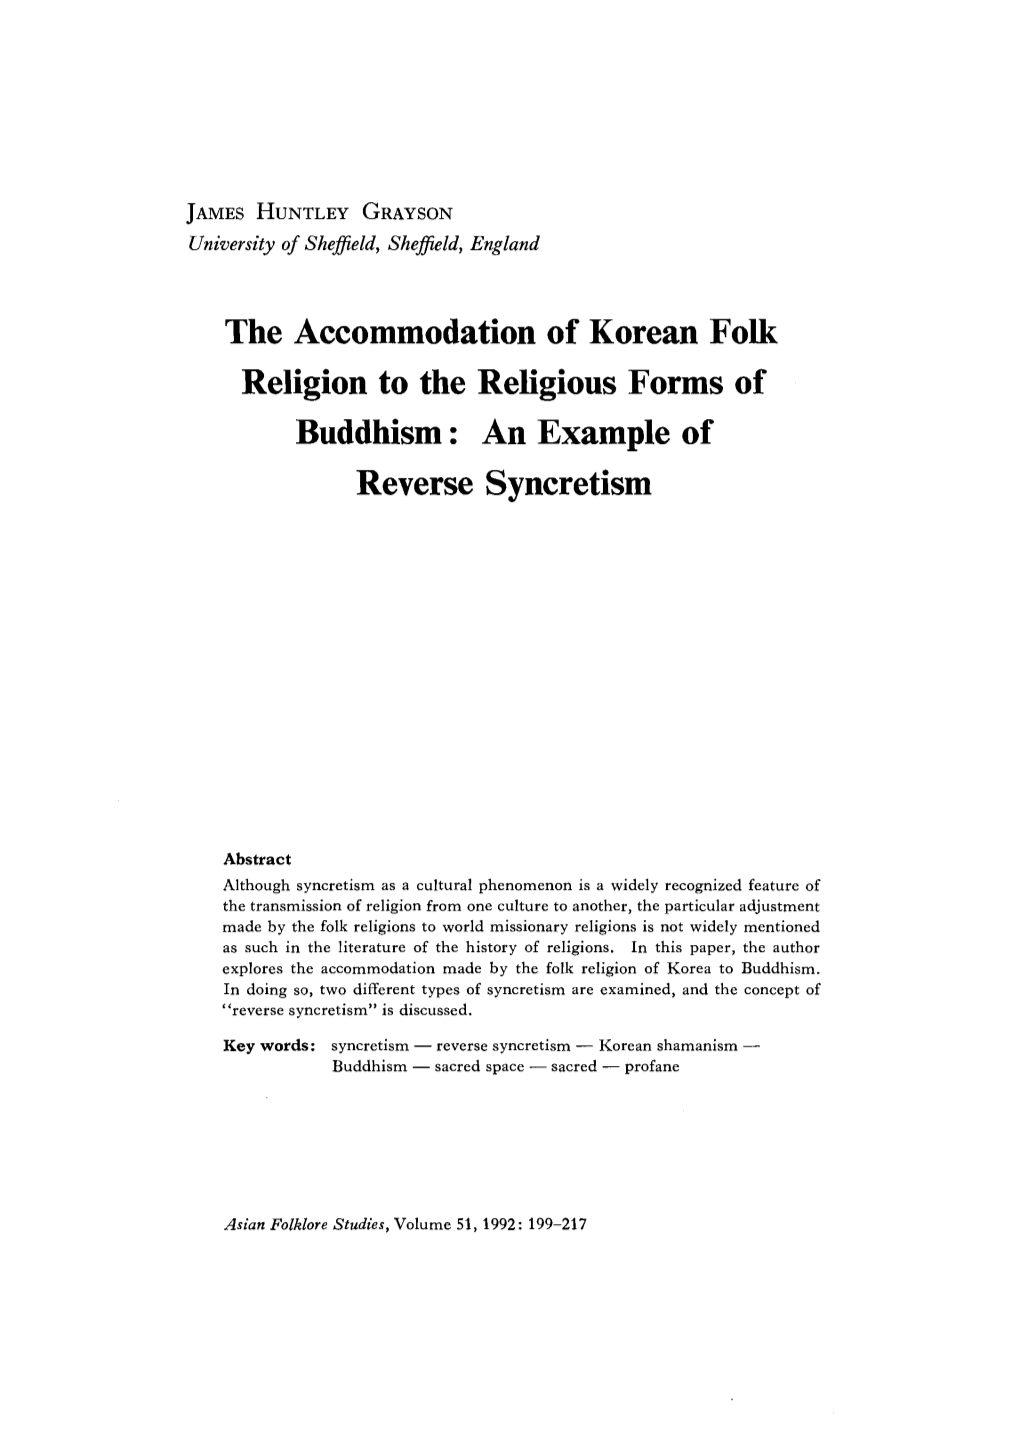 The Accommodation of Korean Folk Religion to the Religious Forms of Buddhism : an Example of Reverse Syncretism